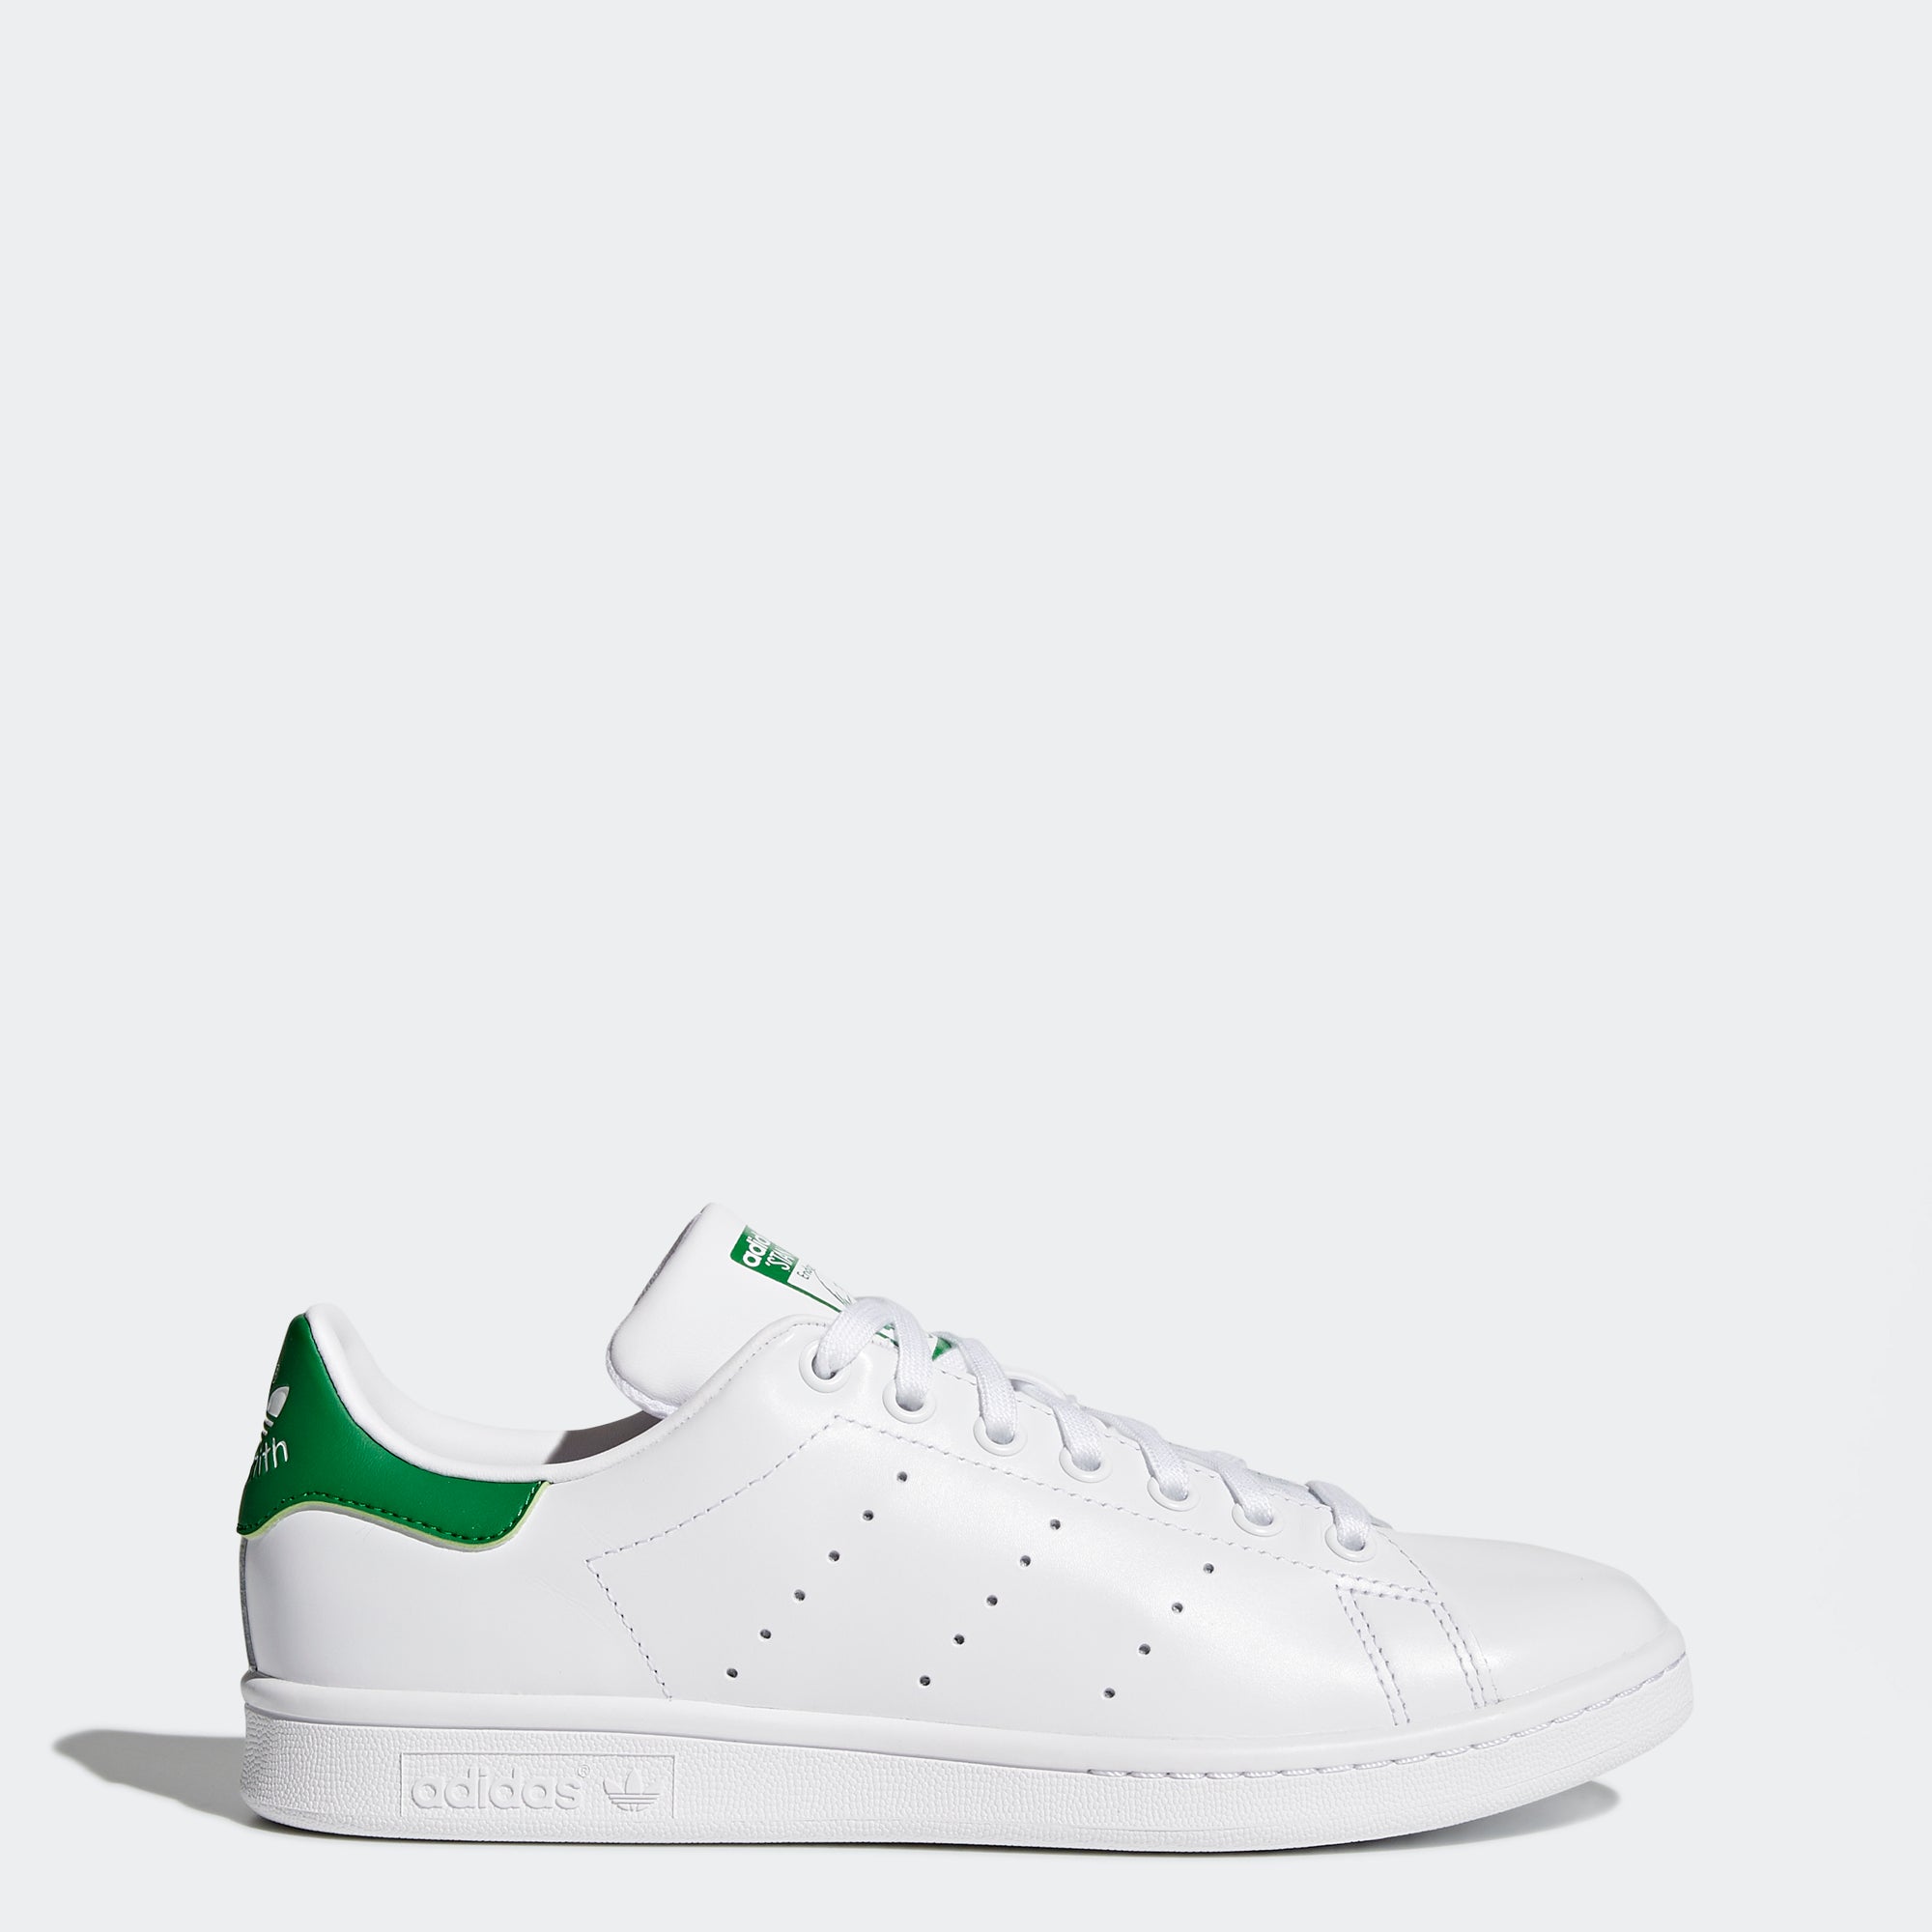 White/Green Stan Chicago | Shoes adidas City M20324 Sports Smith